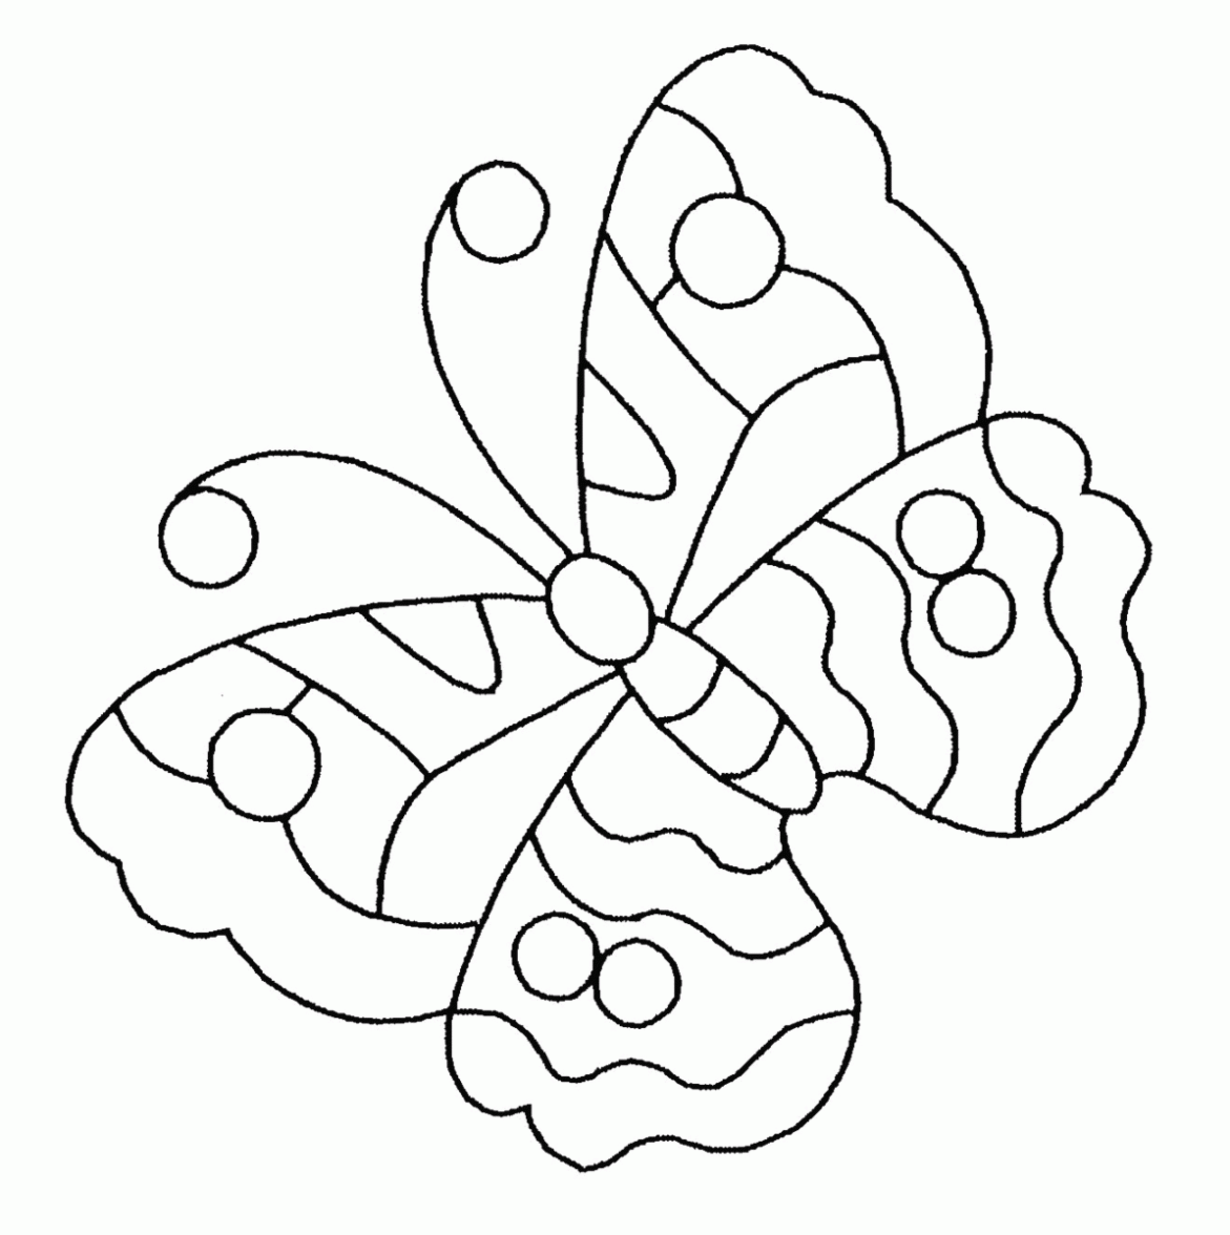 coloring-page-butterfly-15661-animals-printable-coloring-pages